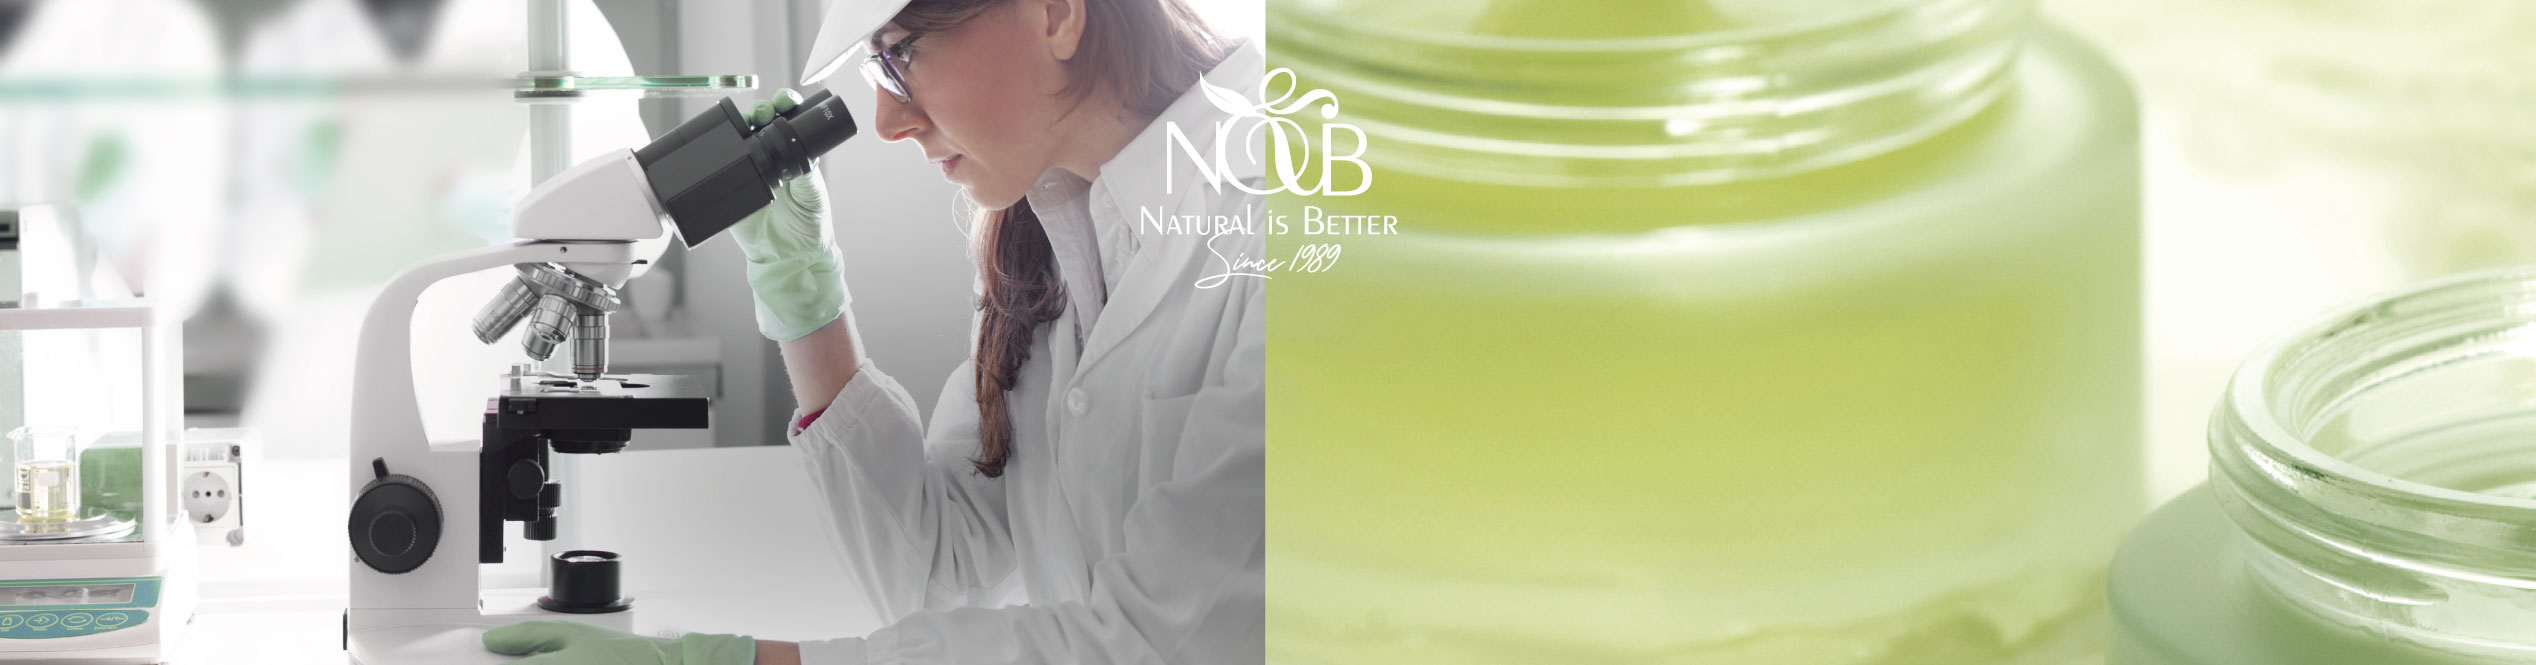 N&B Natural is Better